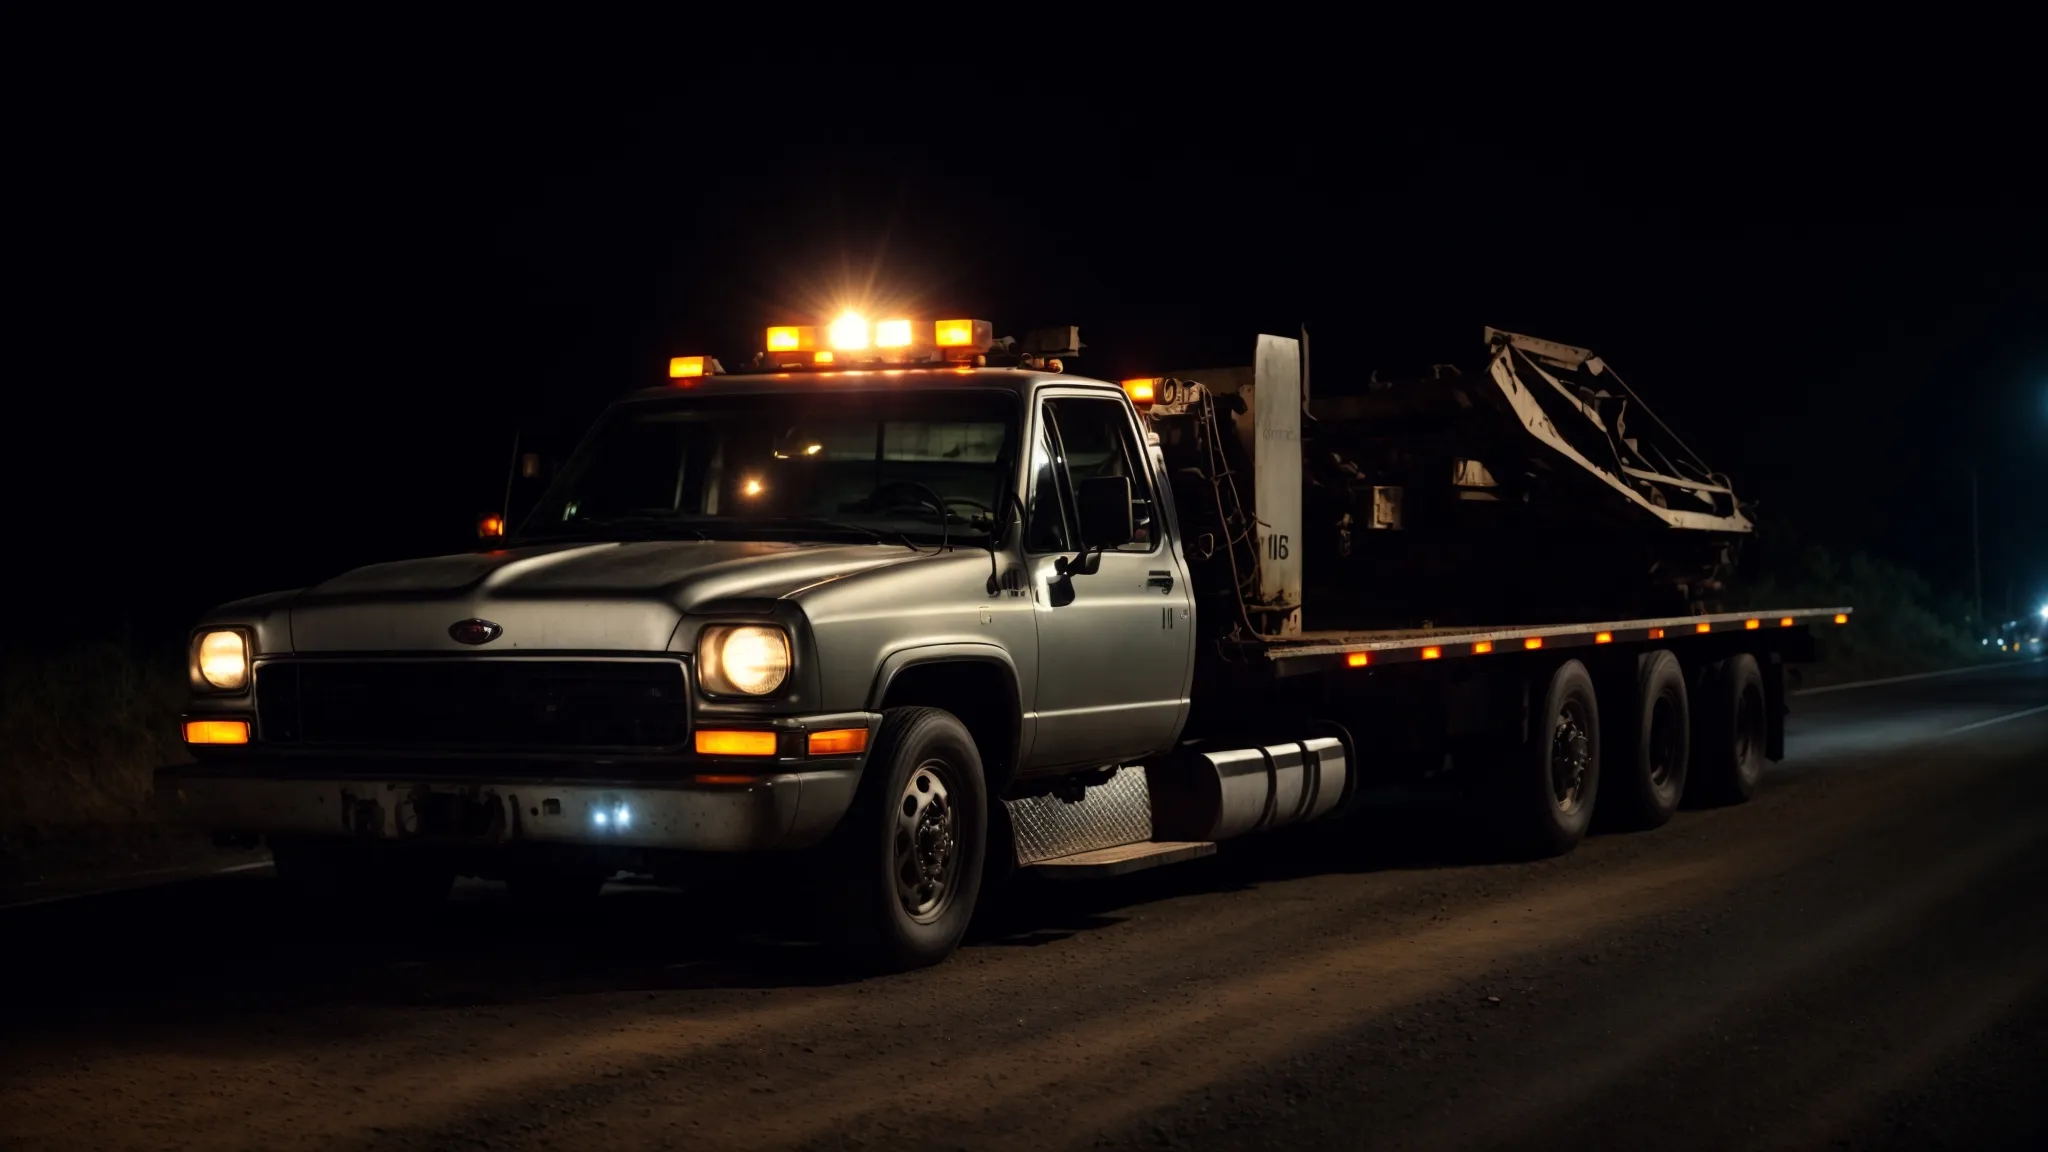 a tow truck hauling a broken-down car at night, with its lights flashing, providing assistance in the dark.